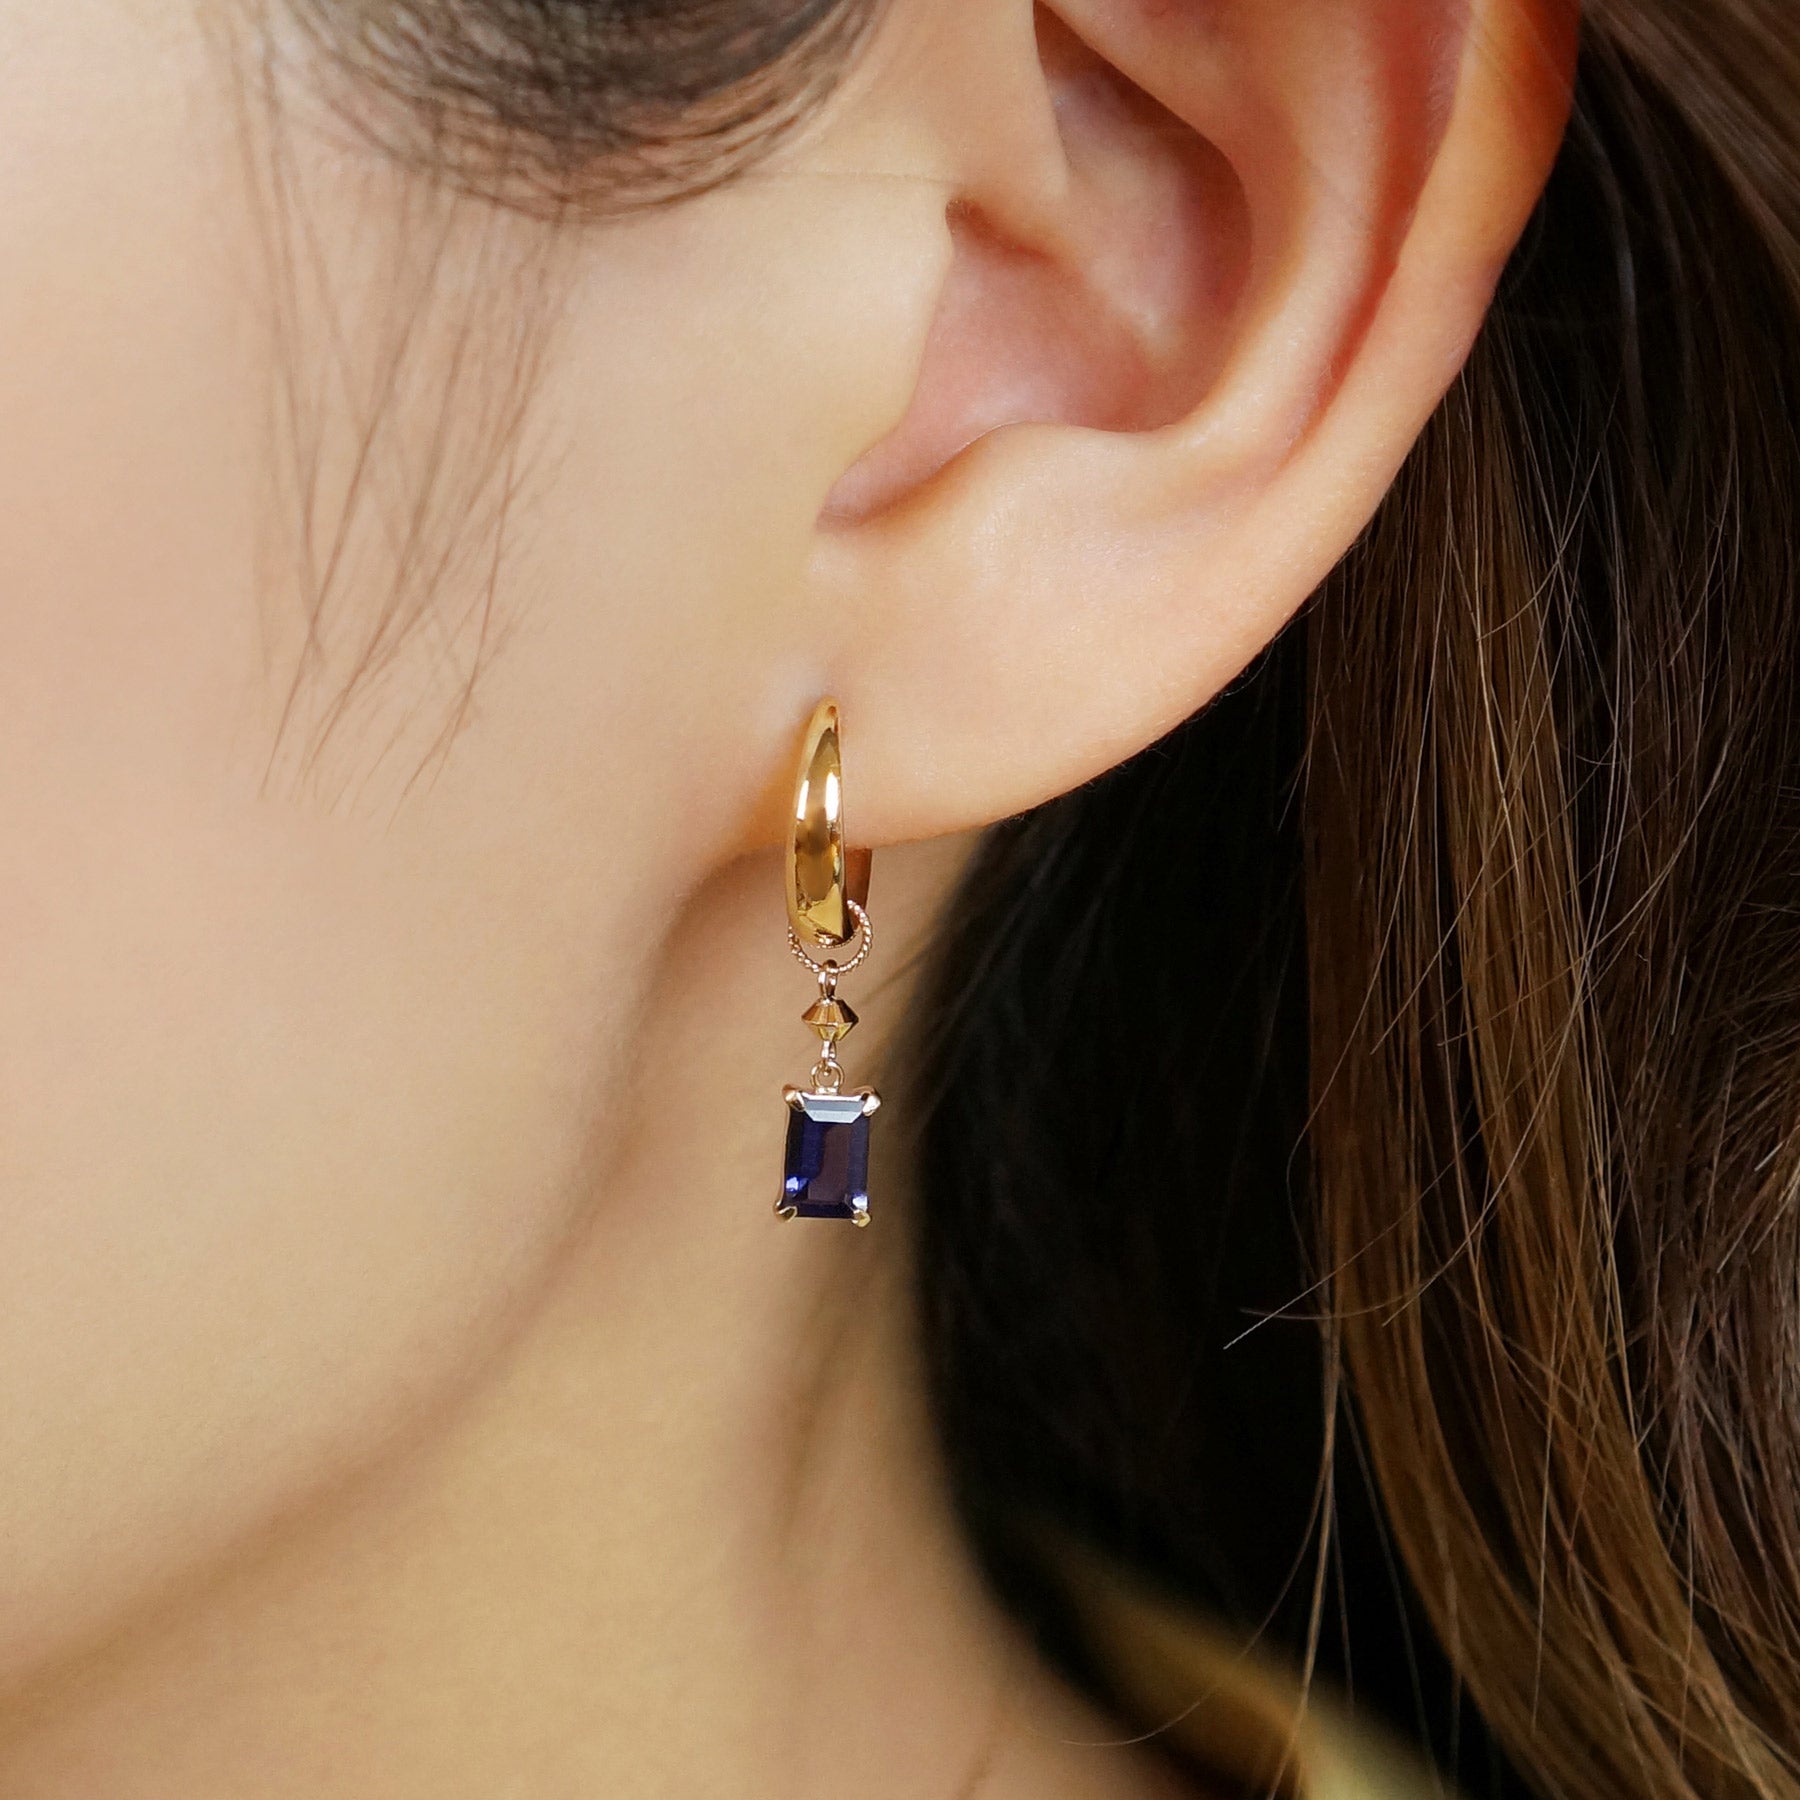 [Palette] 10K Yellow Gold Iolite Square Charms For Hoop Earrings - Model Image